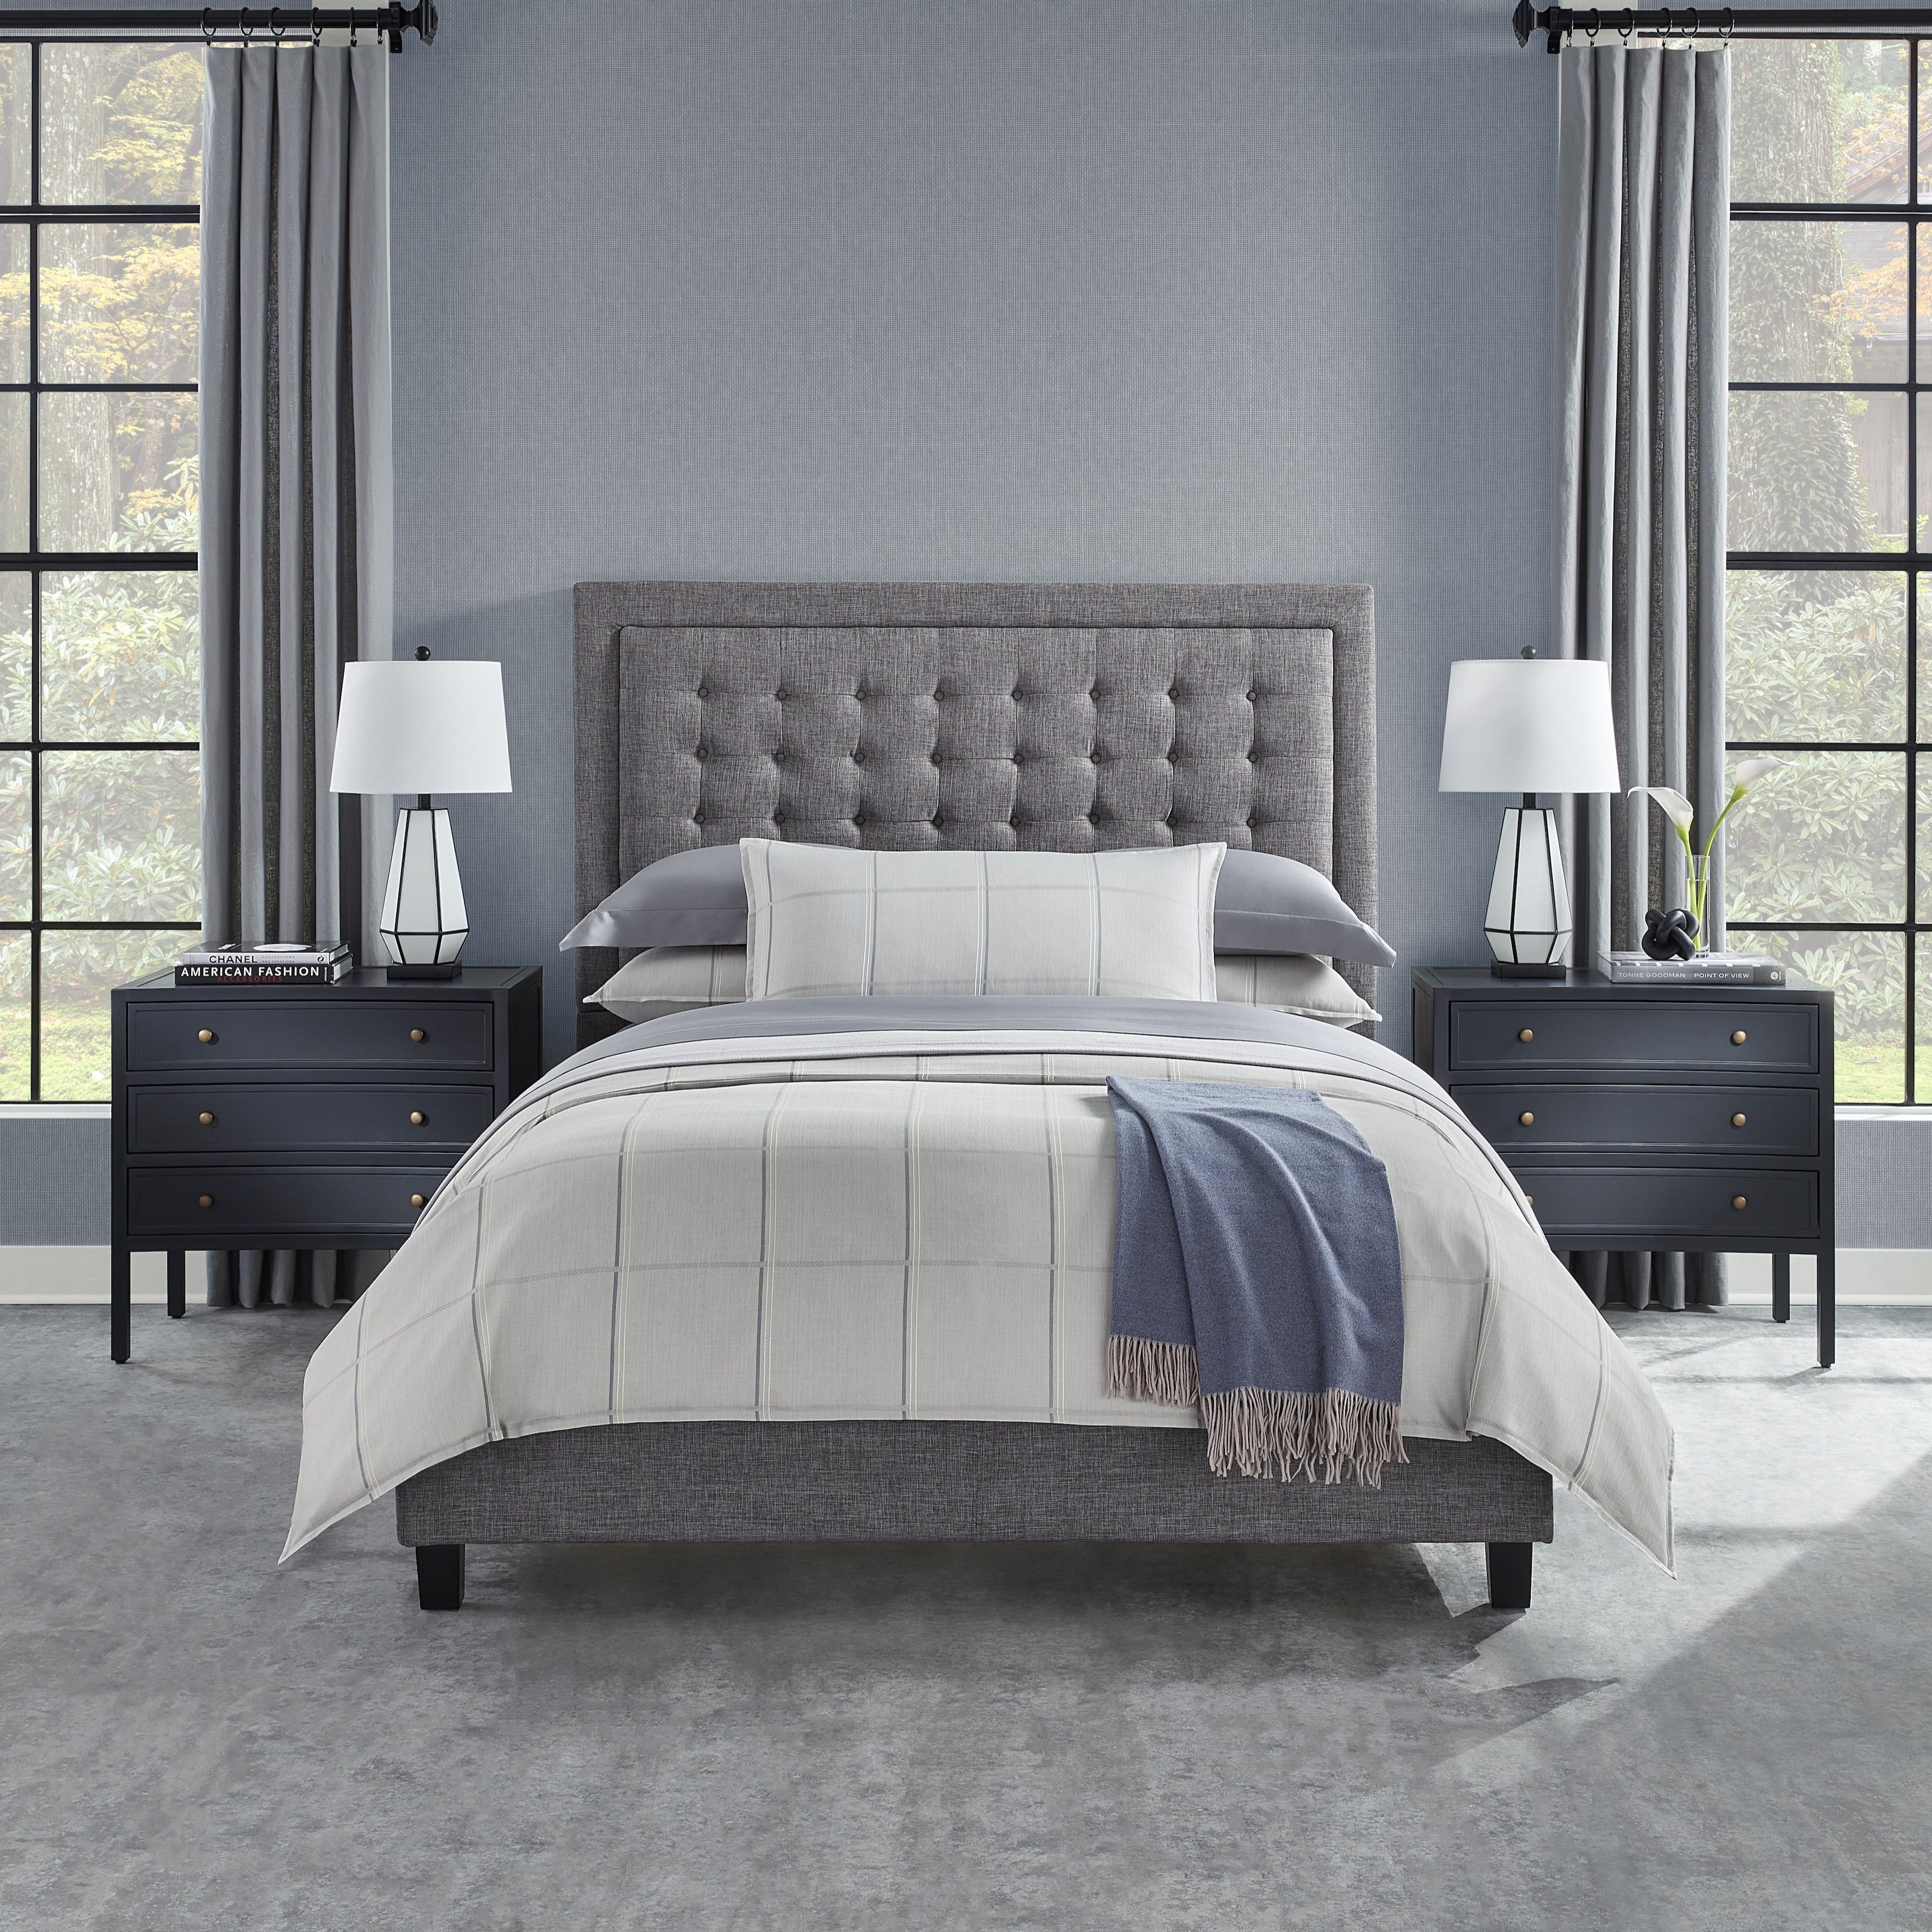 Tronto Bed Linens